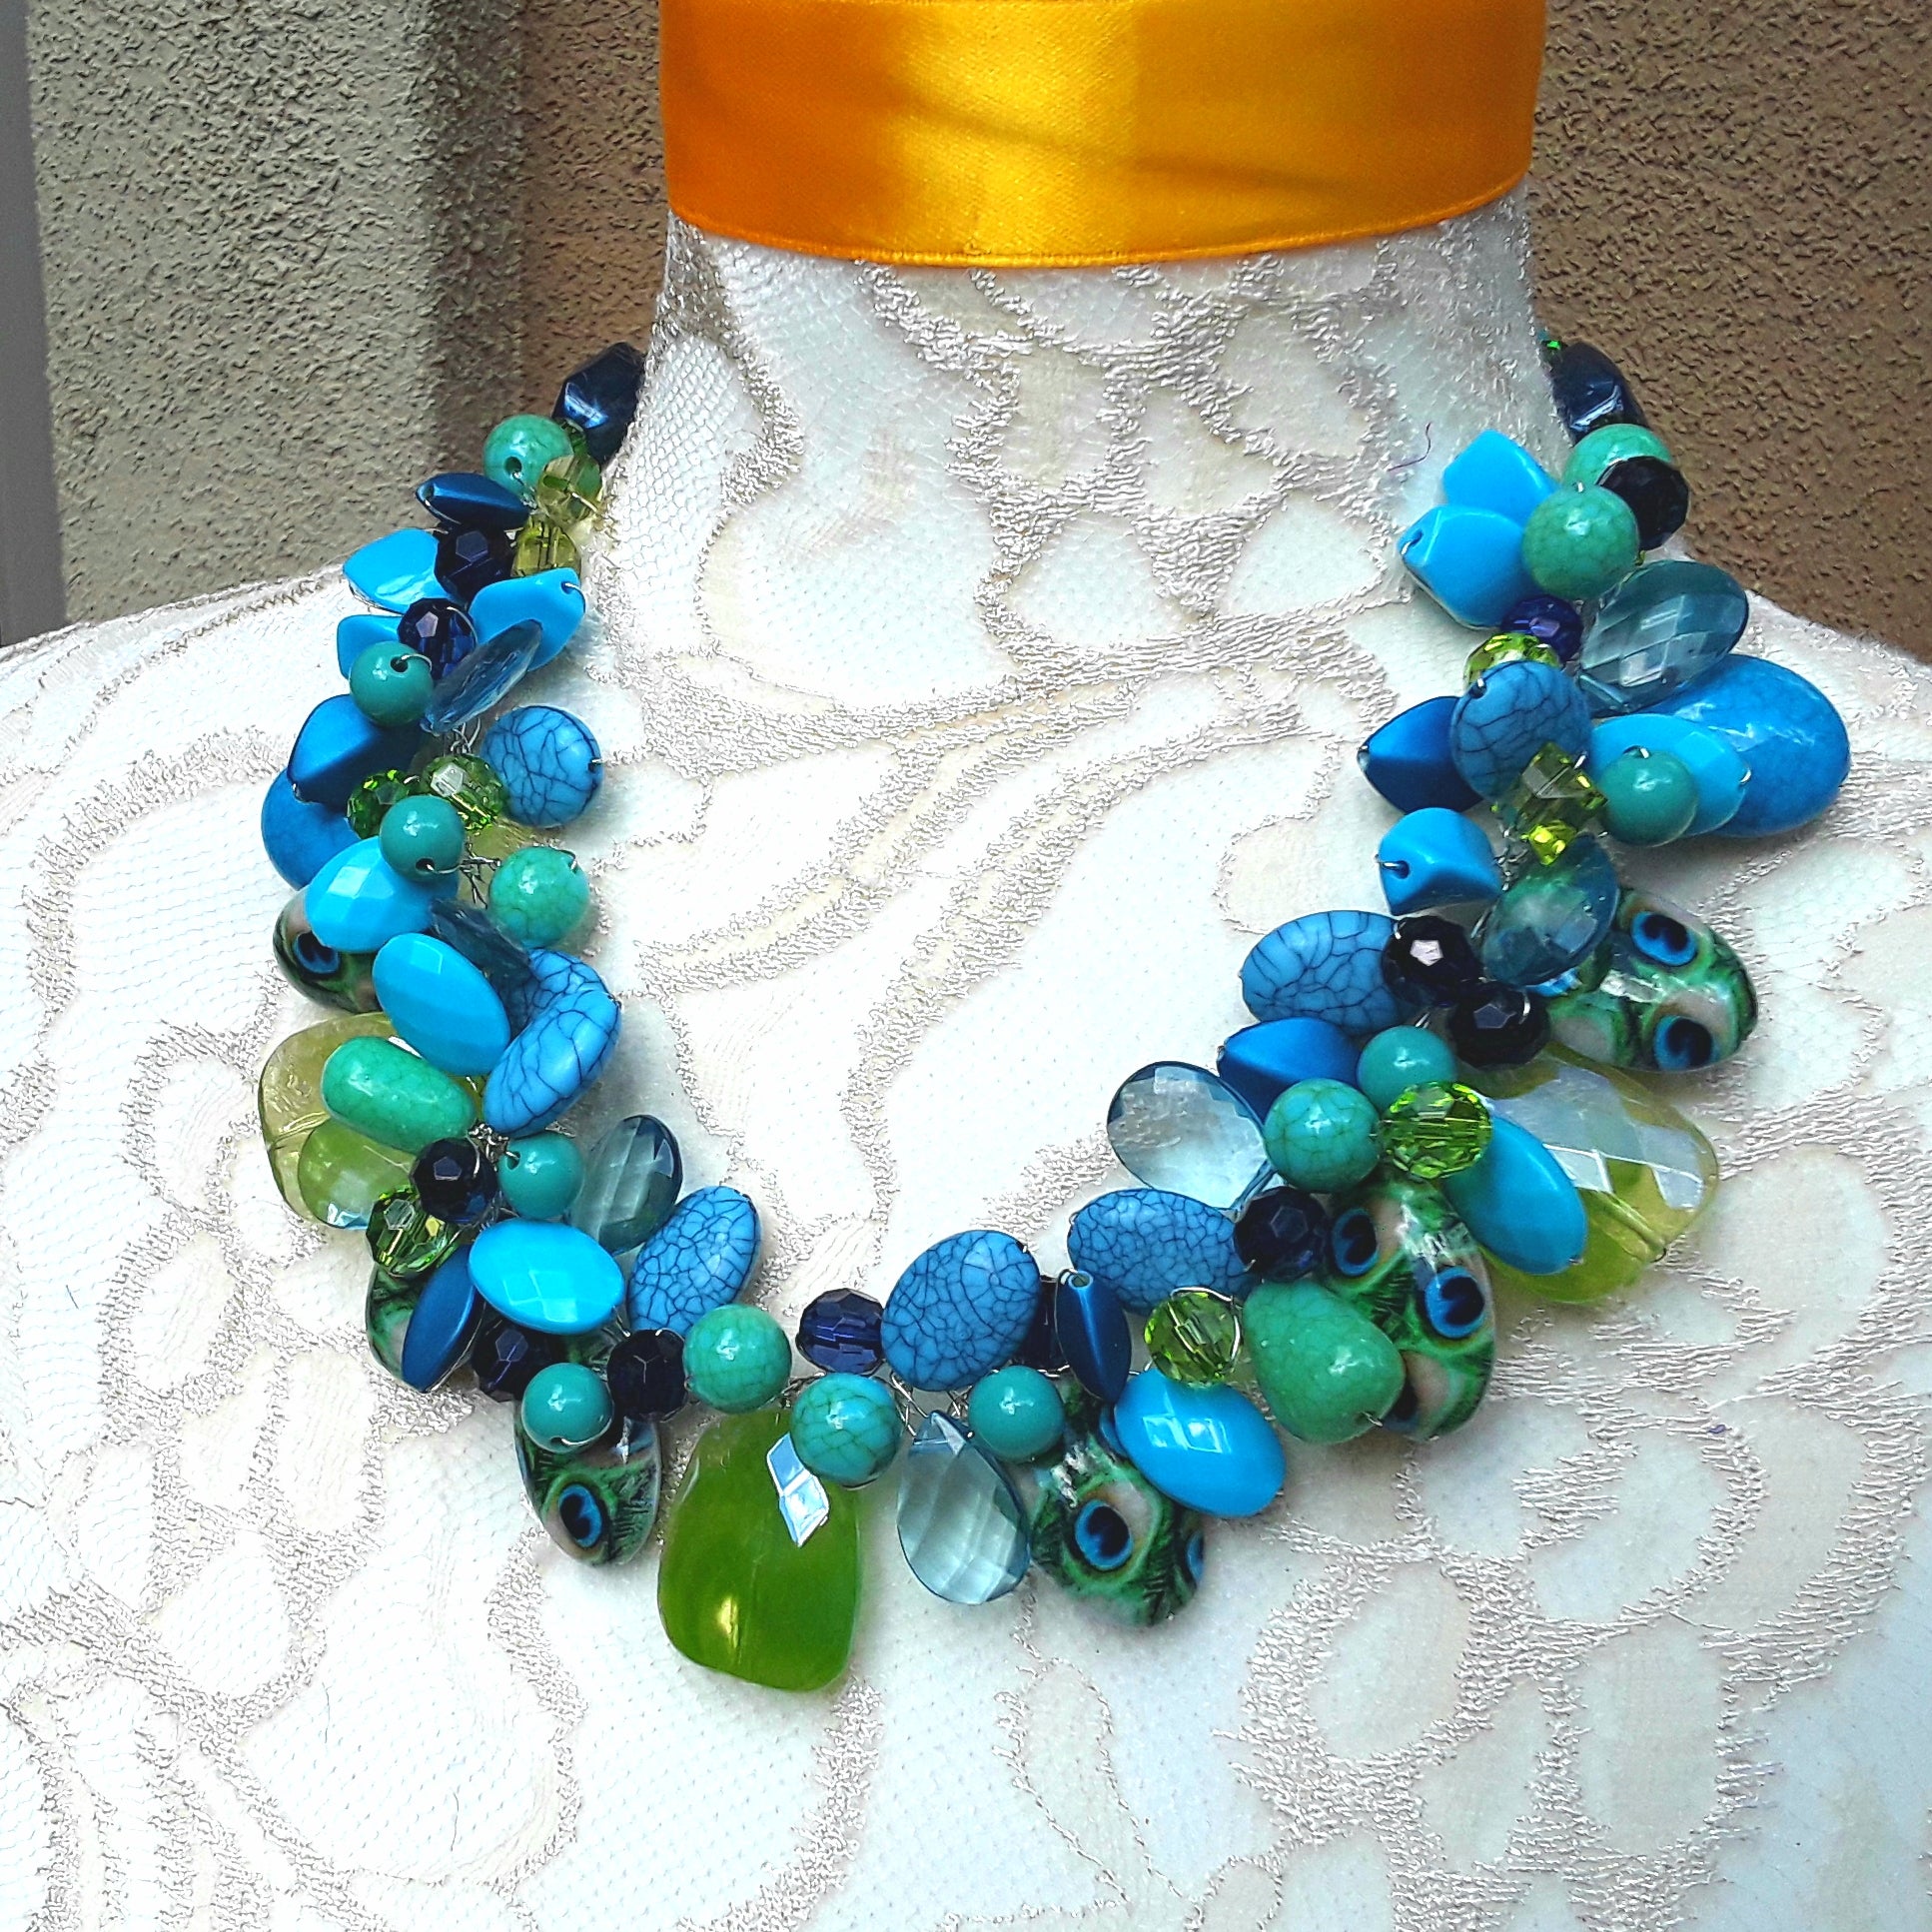 J. CREW Statement Bubble Necklace Green Turquoise Chunky Chic Beads Resin  Bib | eBay